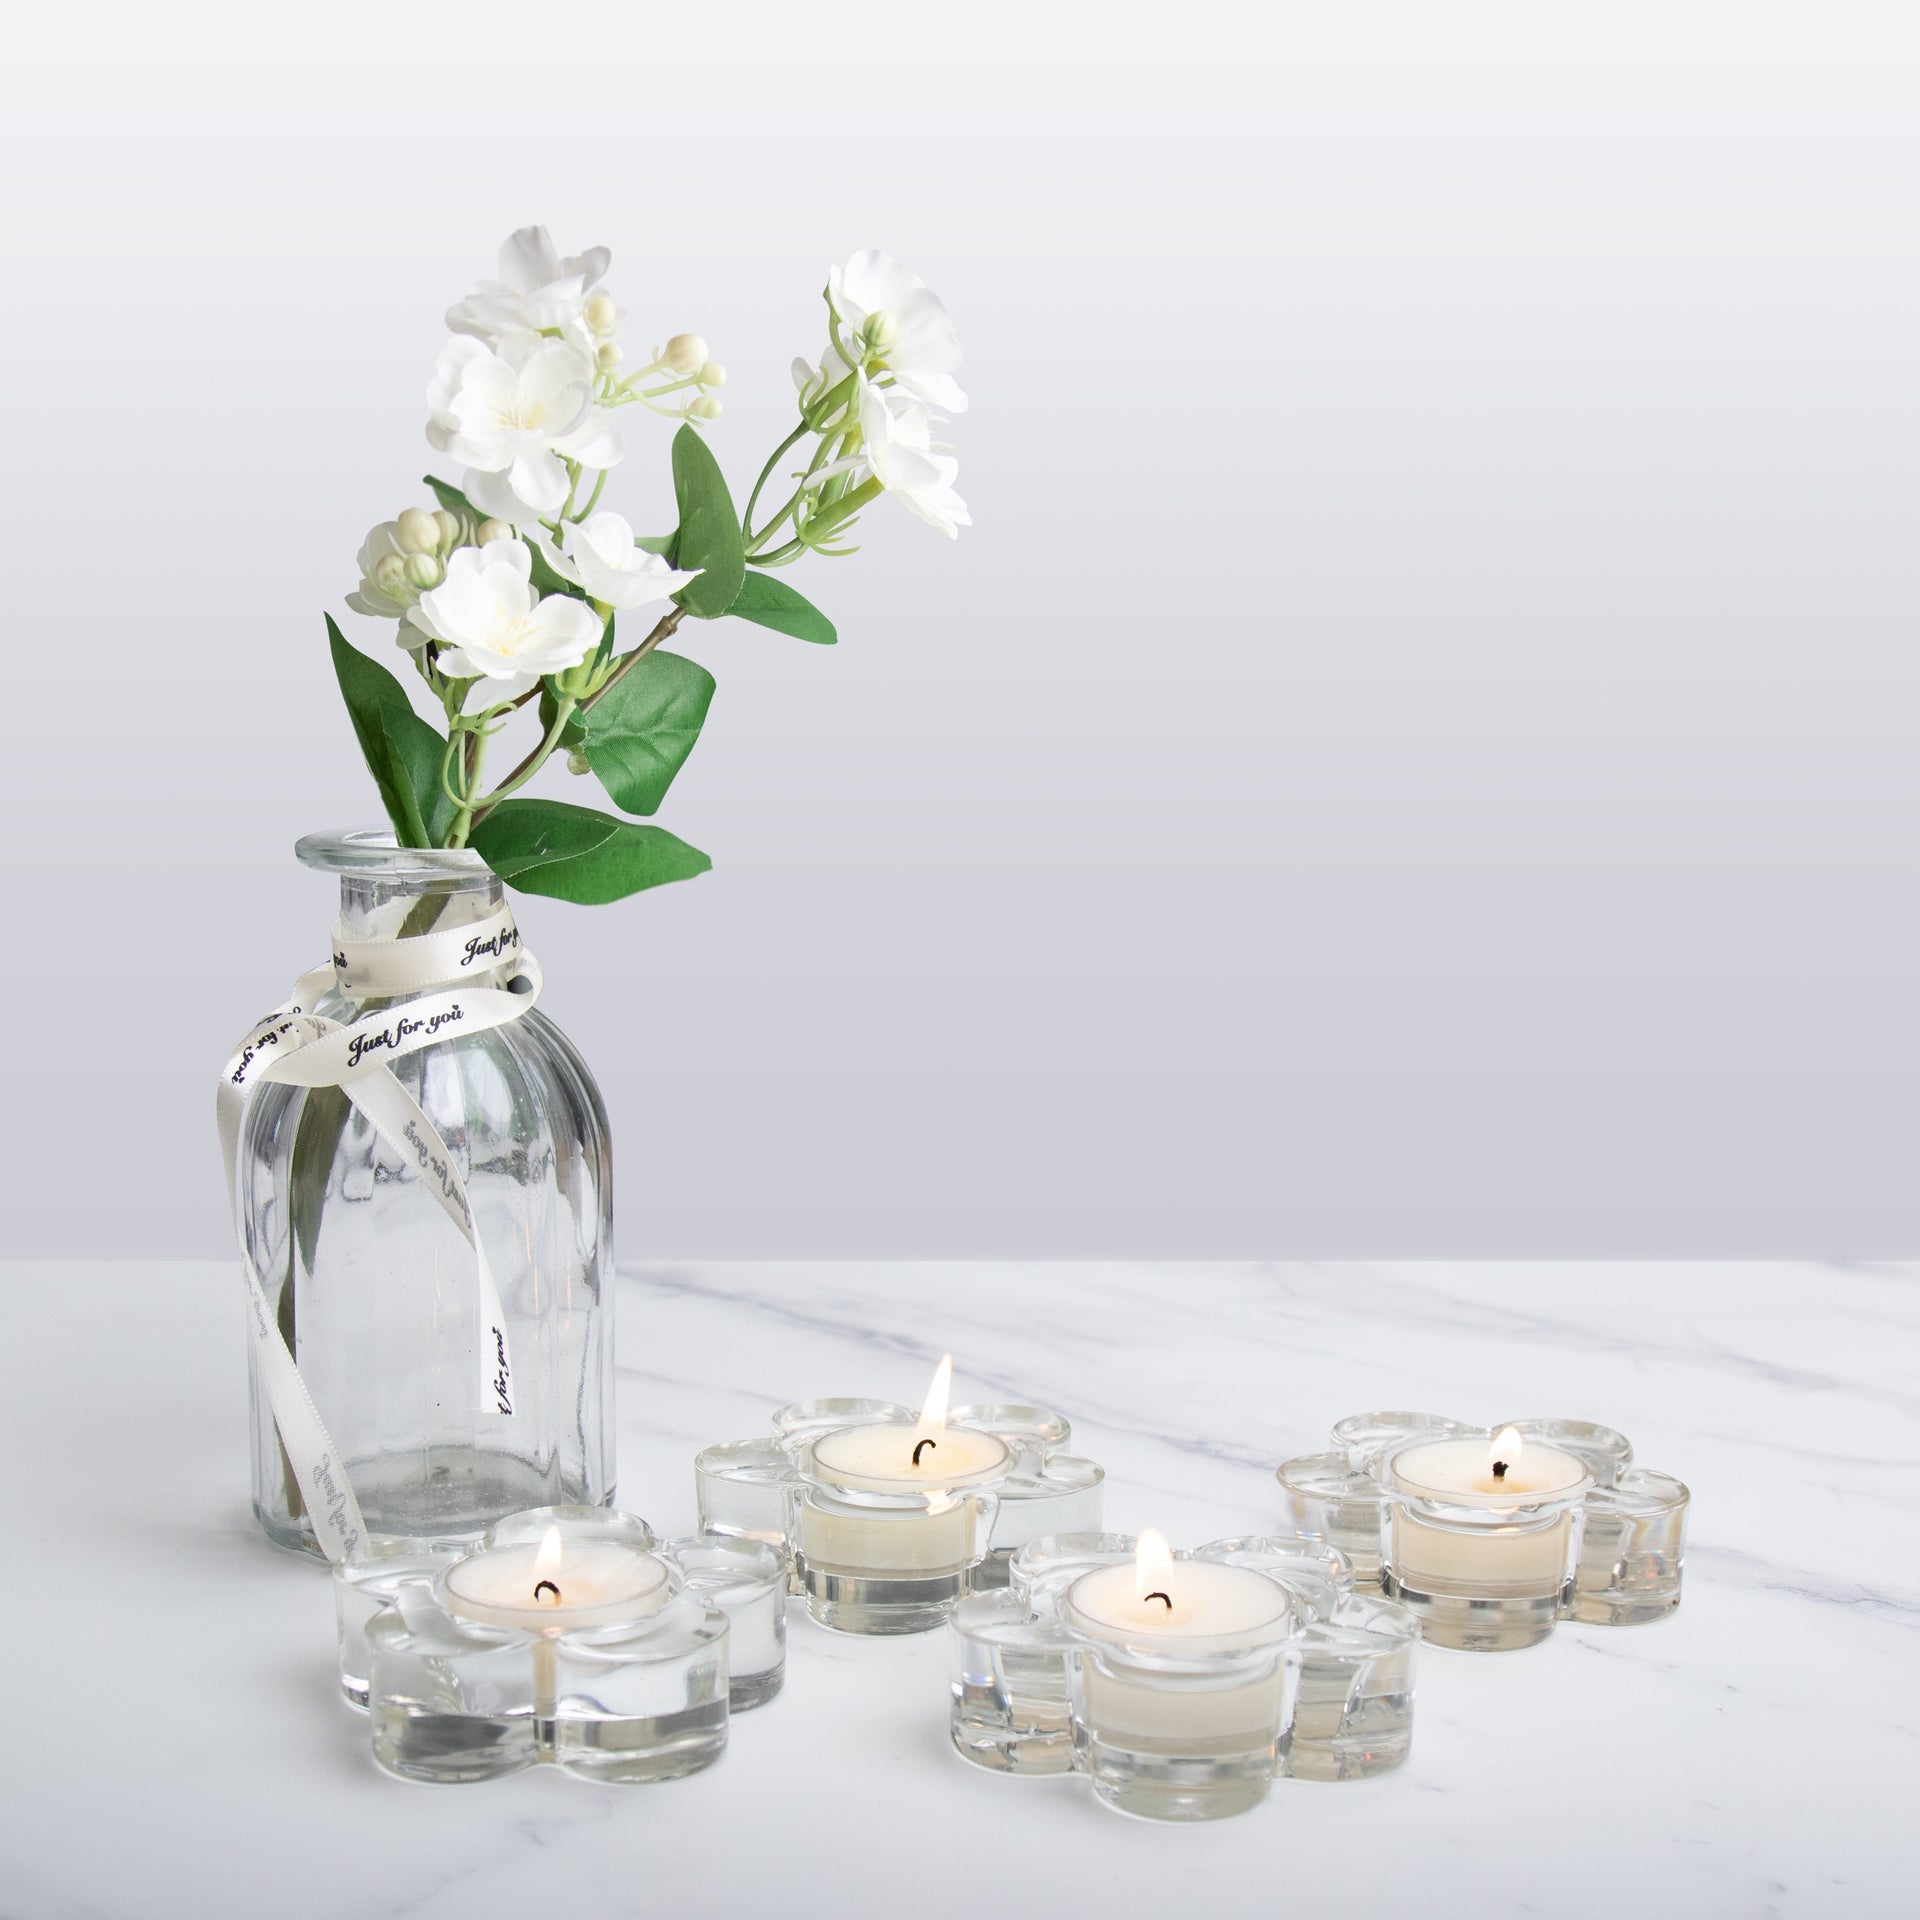 Choosing the Perfect Tea Light Candle Holder for Your Home Decor - VAUCLUSE